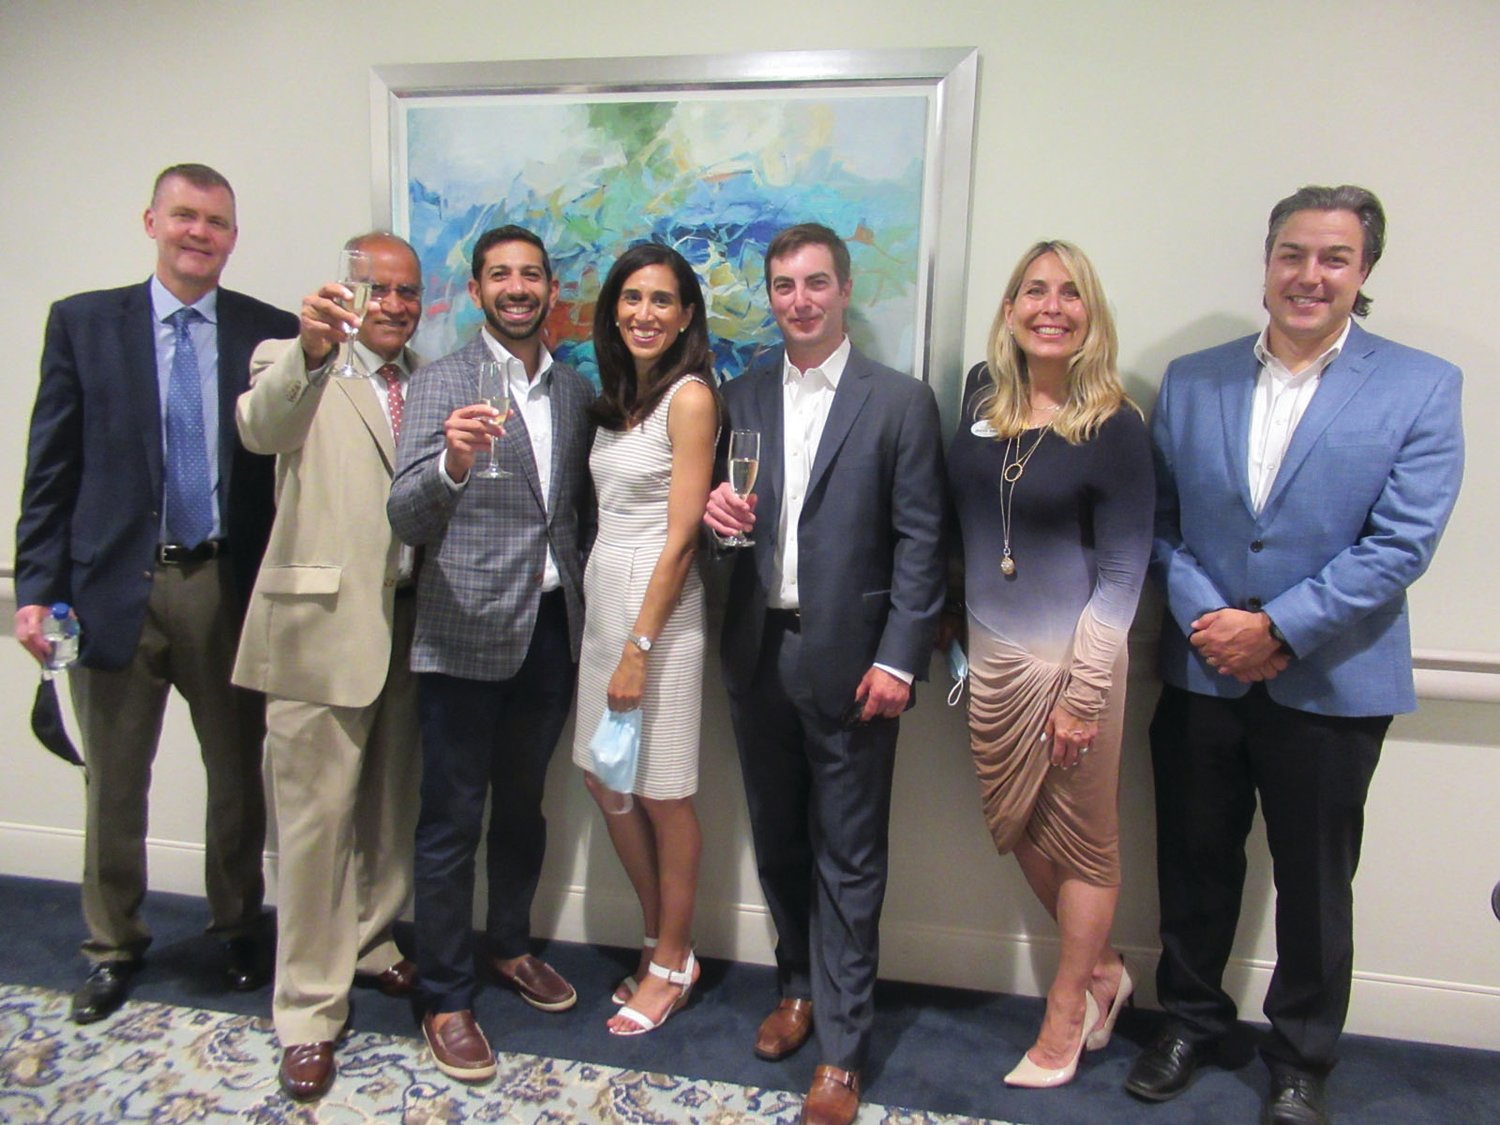 TERRIFIC TOAST: Briarcliffe CEO/President Akshay Talwar (second left) offers a toast during last week’s official opening of The Preserve. He’s joined by, from left: Patrick McAssey, Principal Clifton Larson Allen LLP, Anand Talwar, Nisha Talwar, Timothy Day, Stefany Reed and David Bodah, Executive Director of Rhode Island Living.